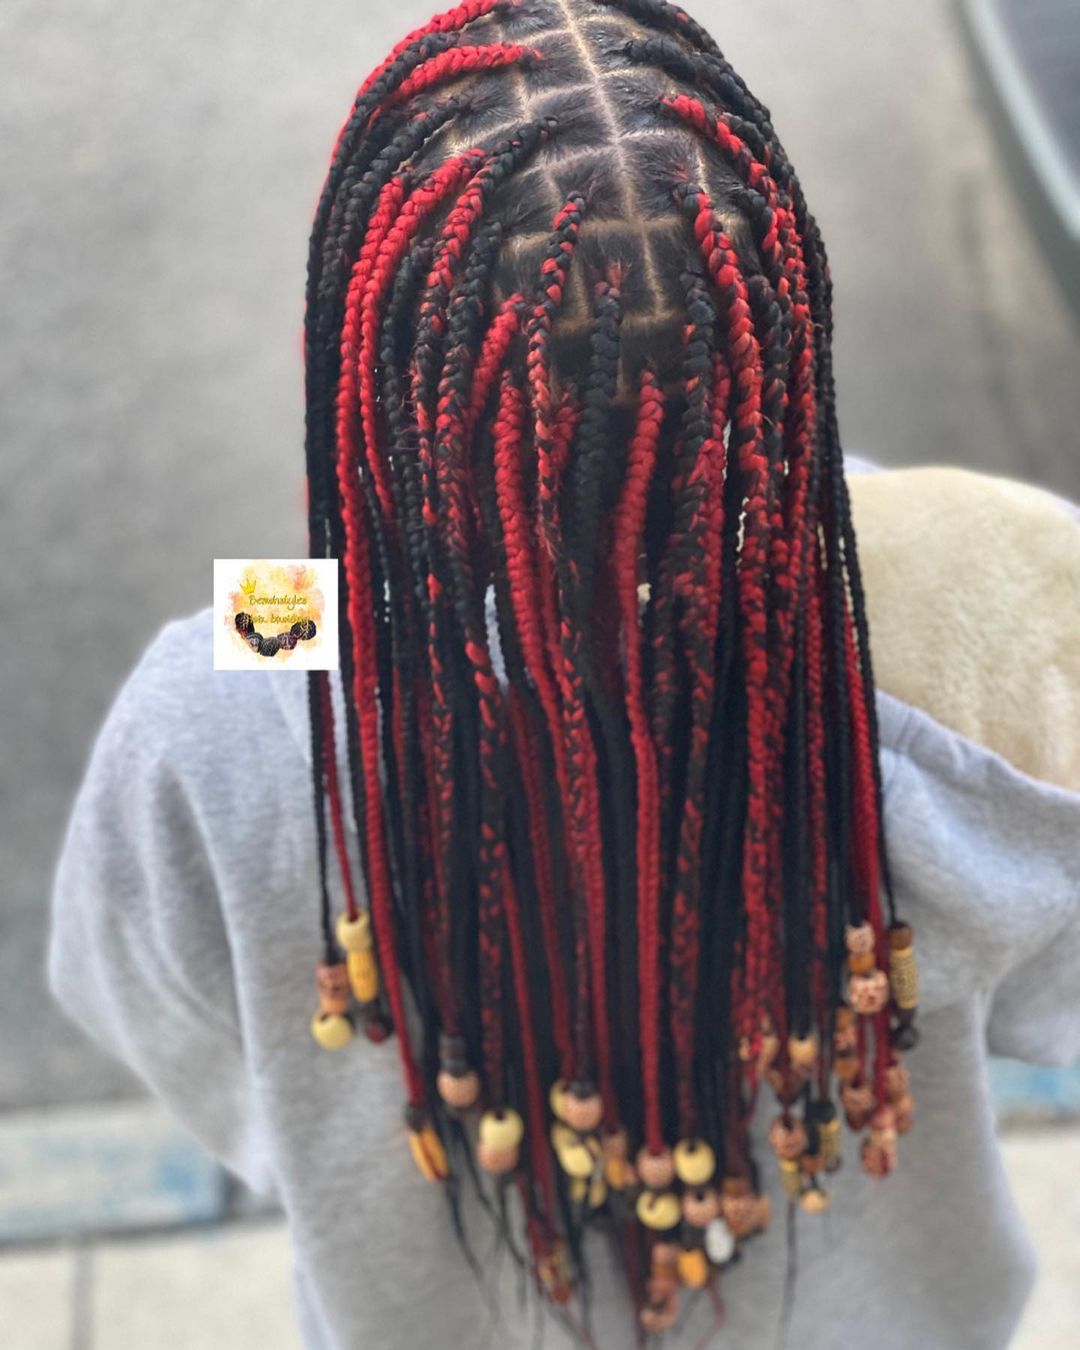 38. Black And Red Center Part Knotless Braids With Brown Beads